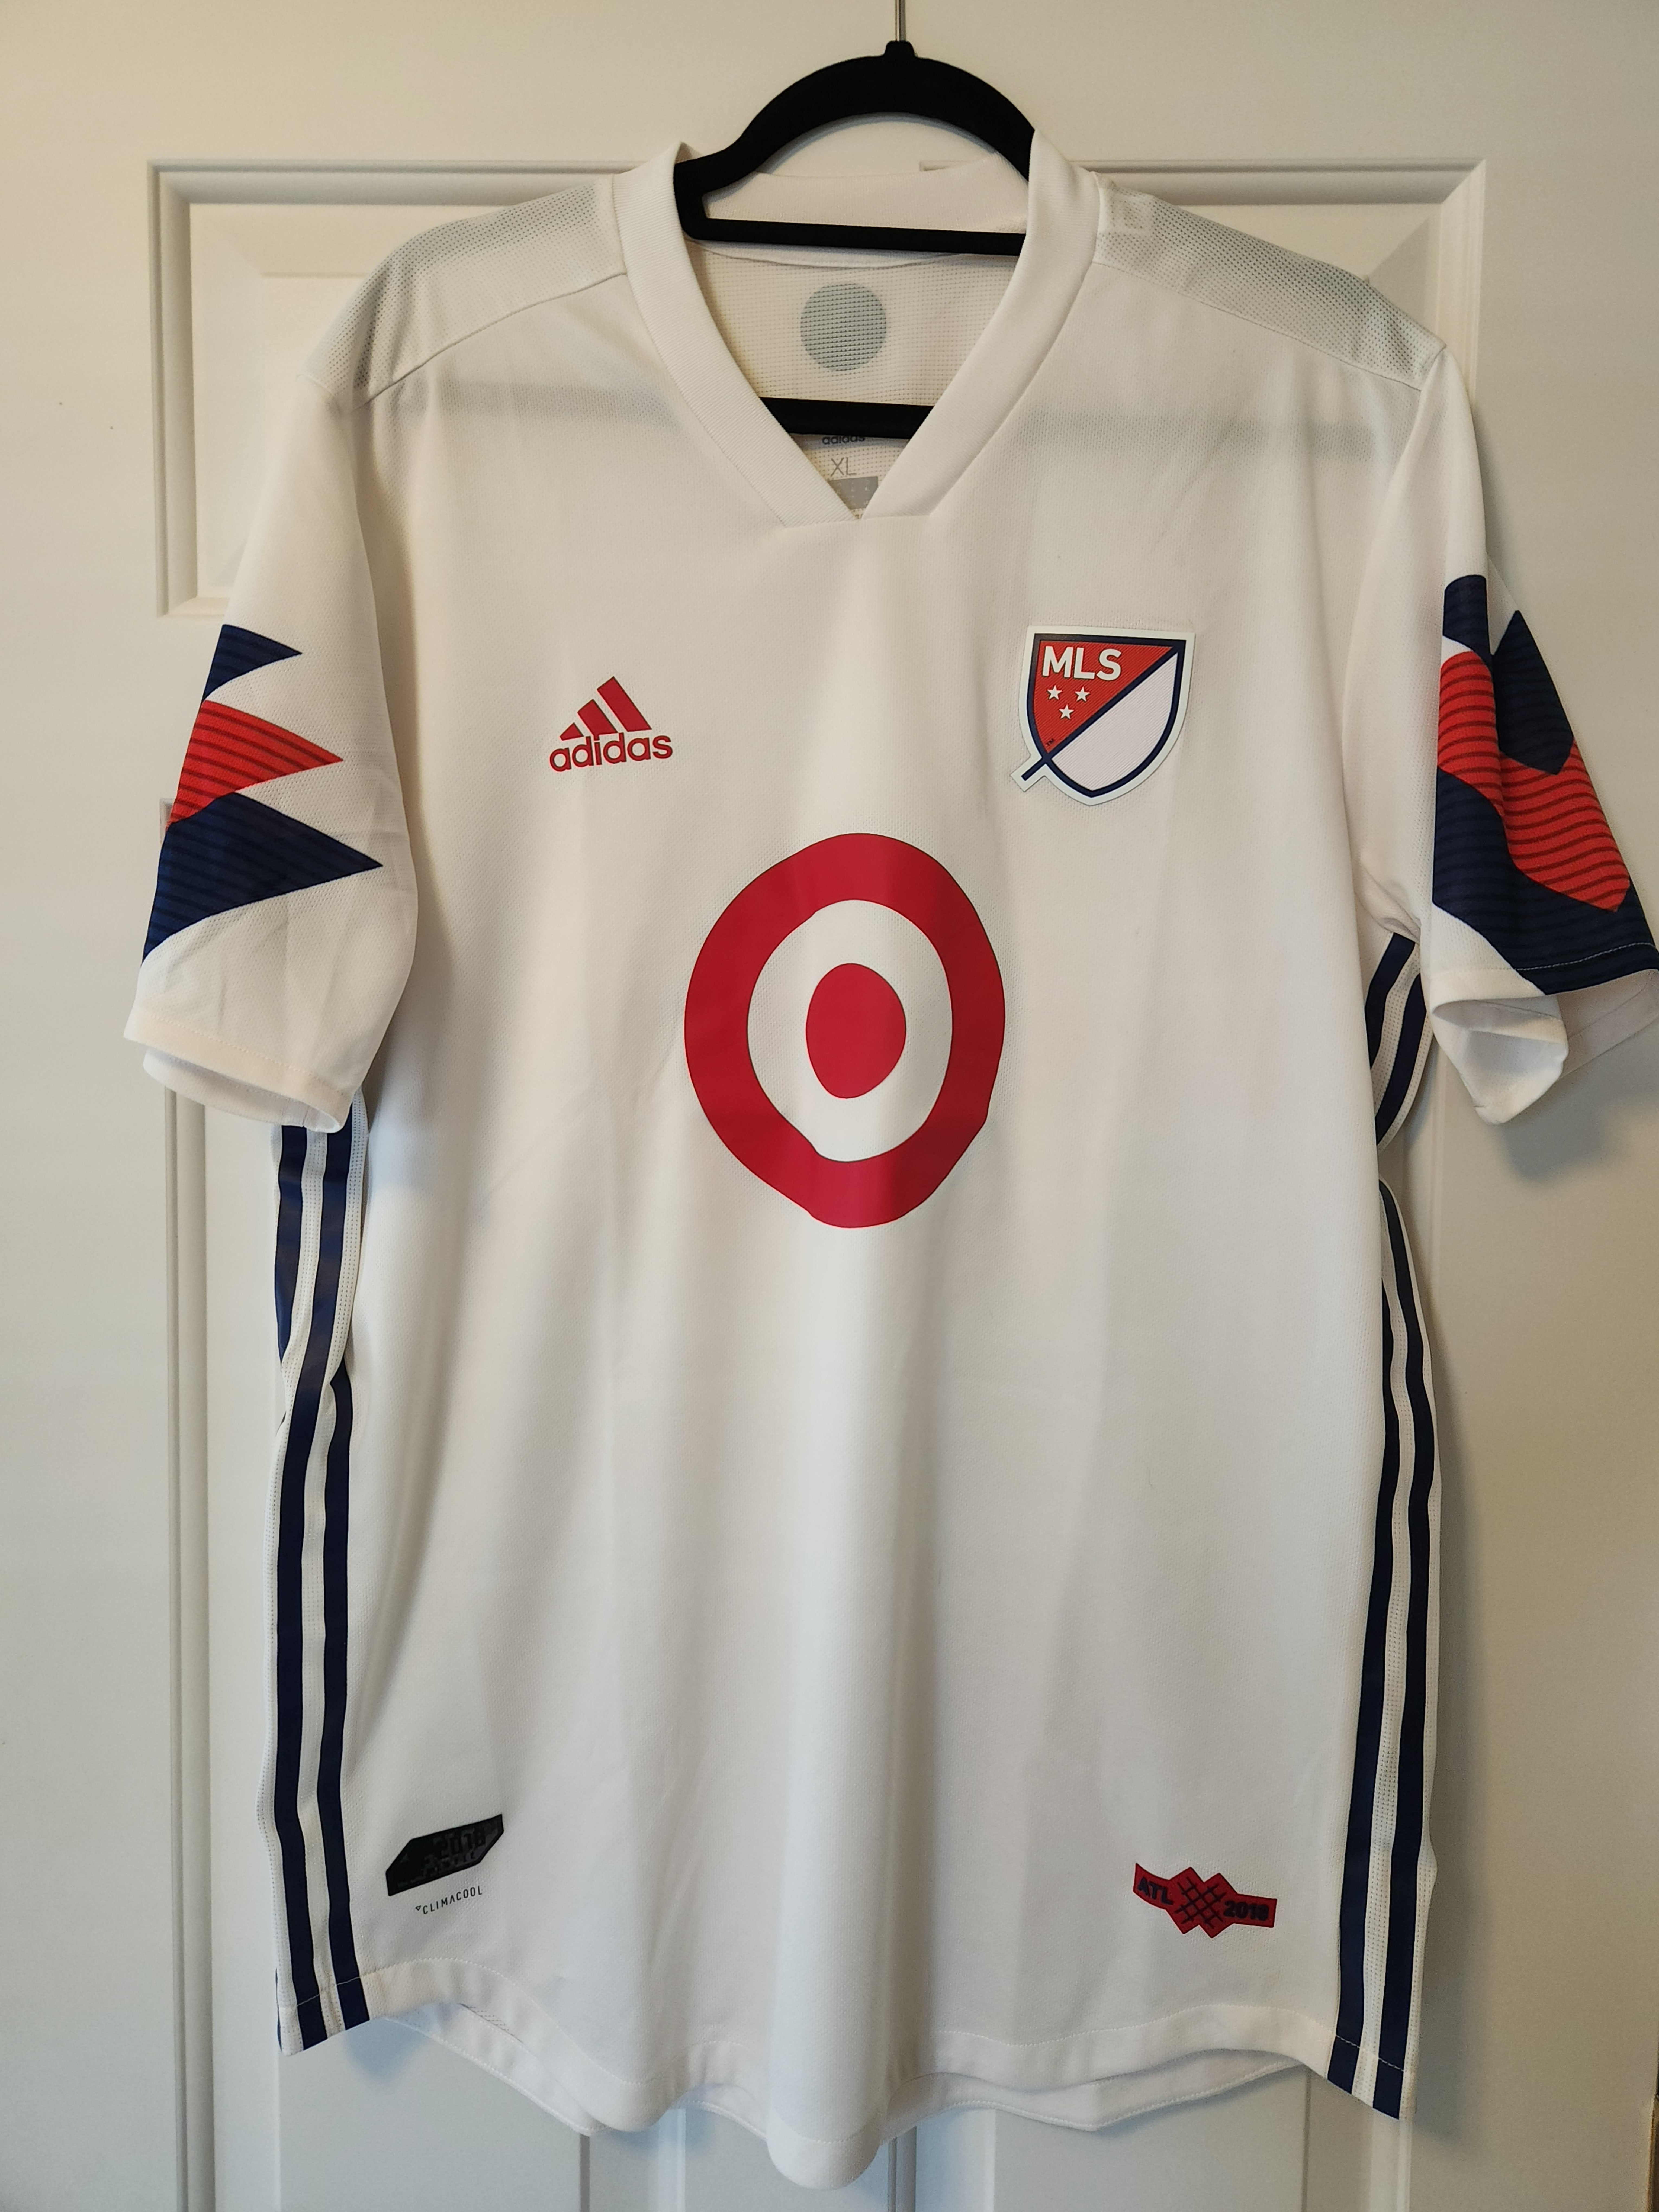 2018 Adidas MLS All-Star Authentic Jersey - White/Navy - Men's XL